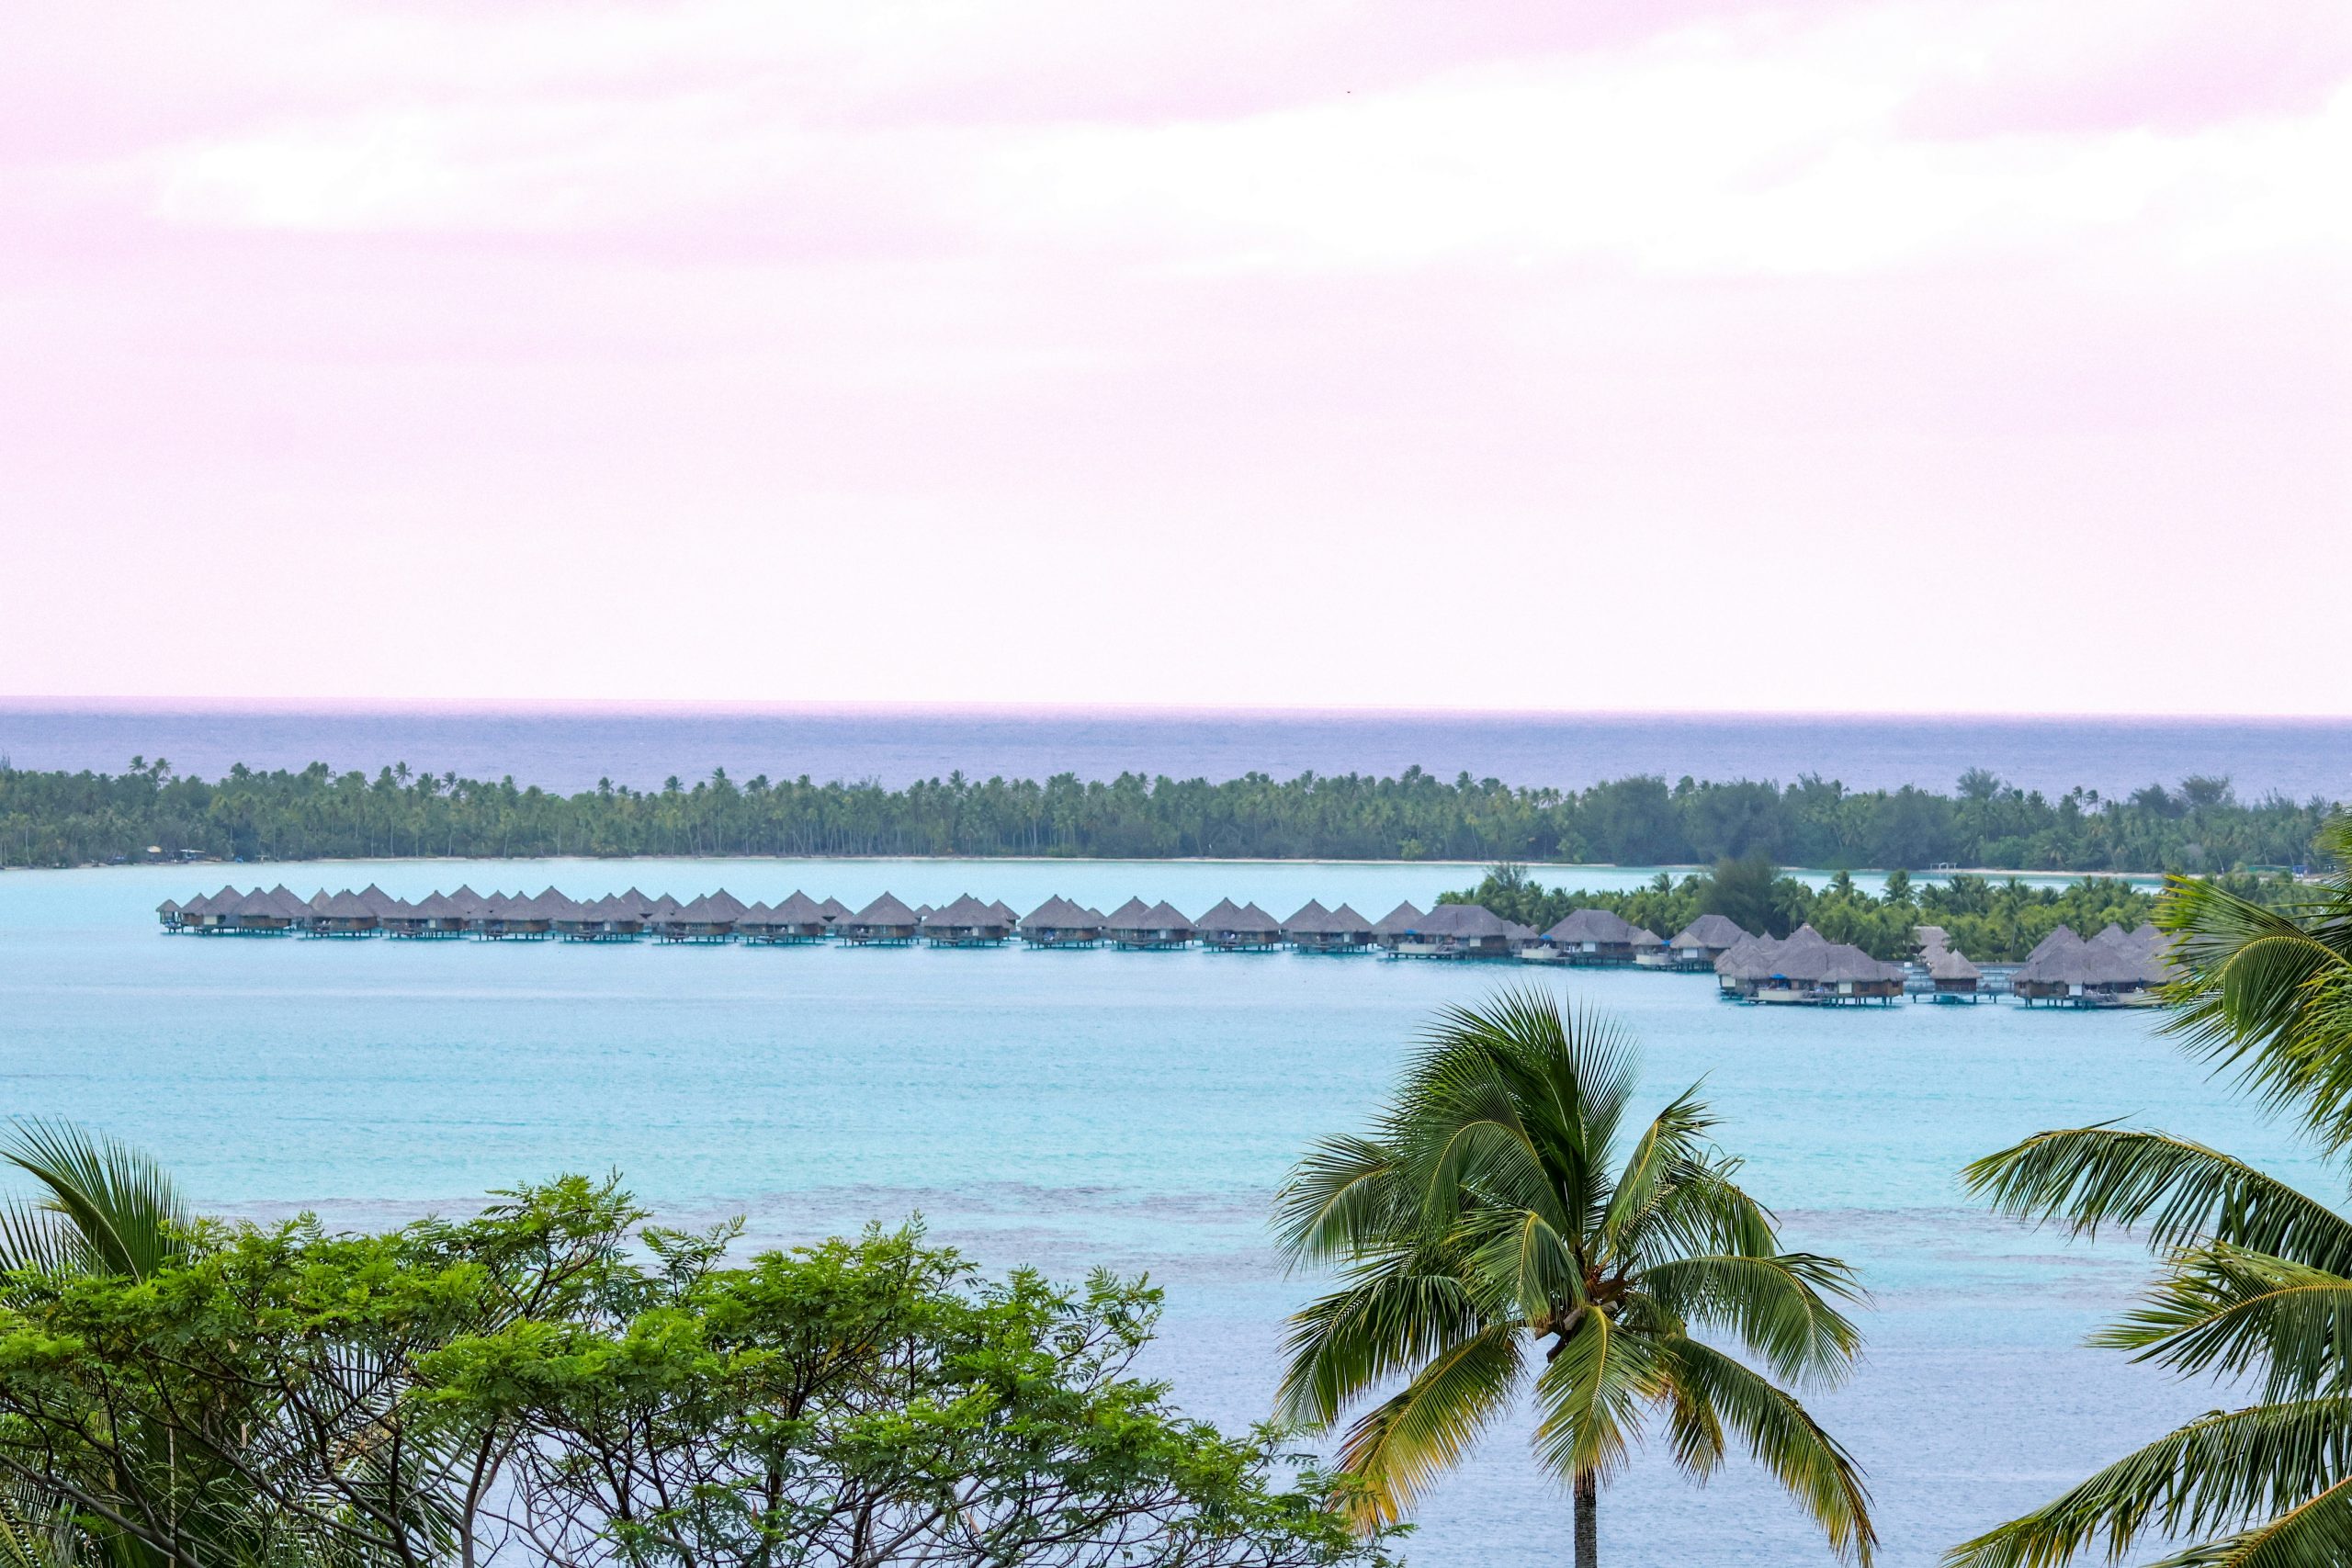 discover the hidden treasures of tahiti with our unparalleled tourism experiences.